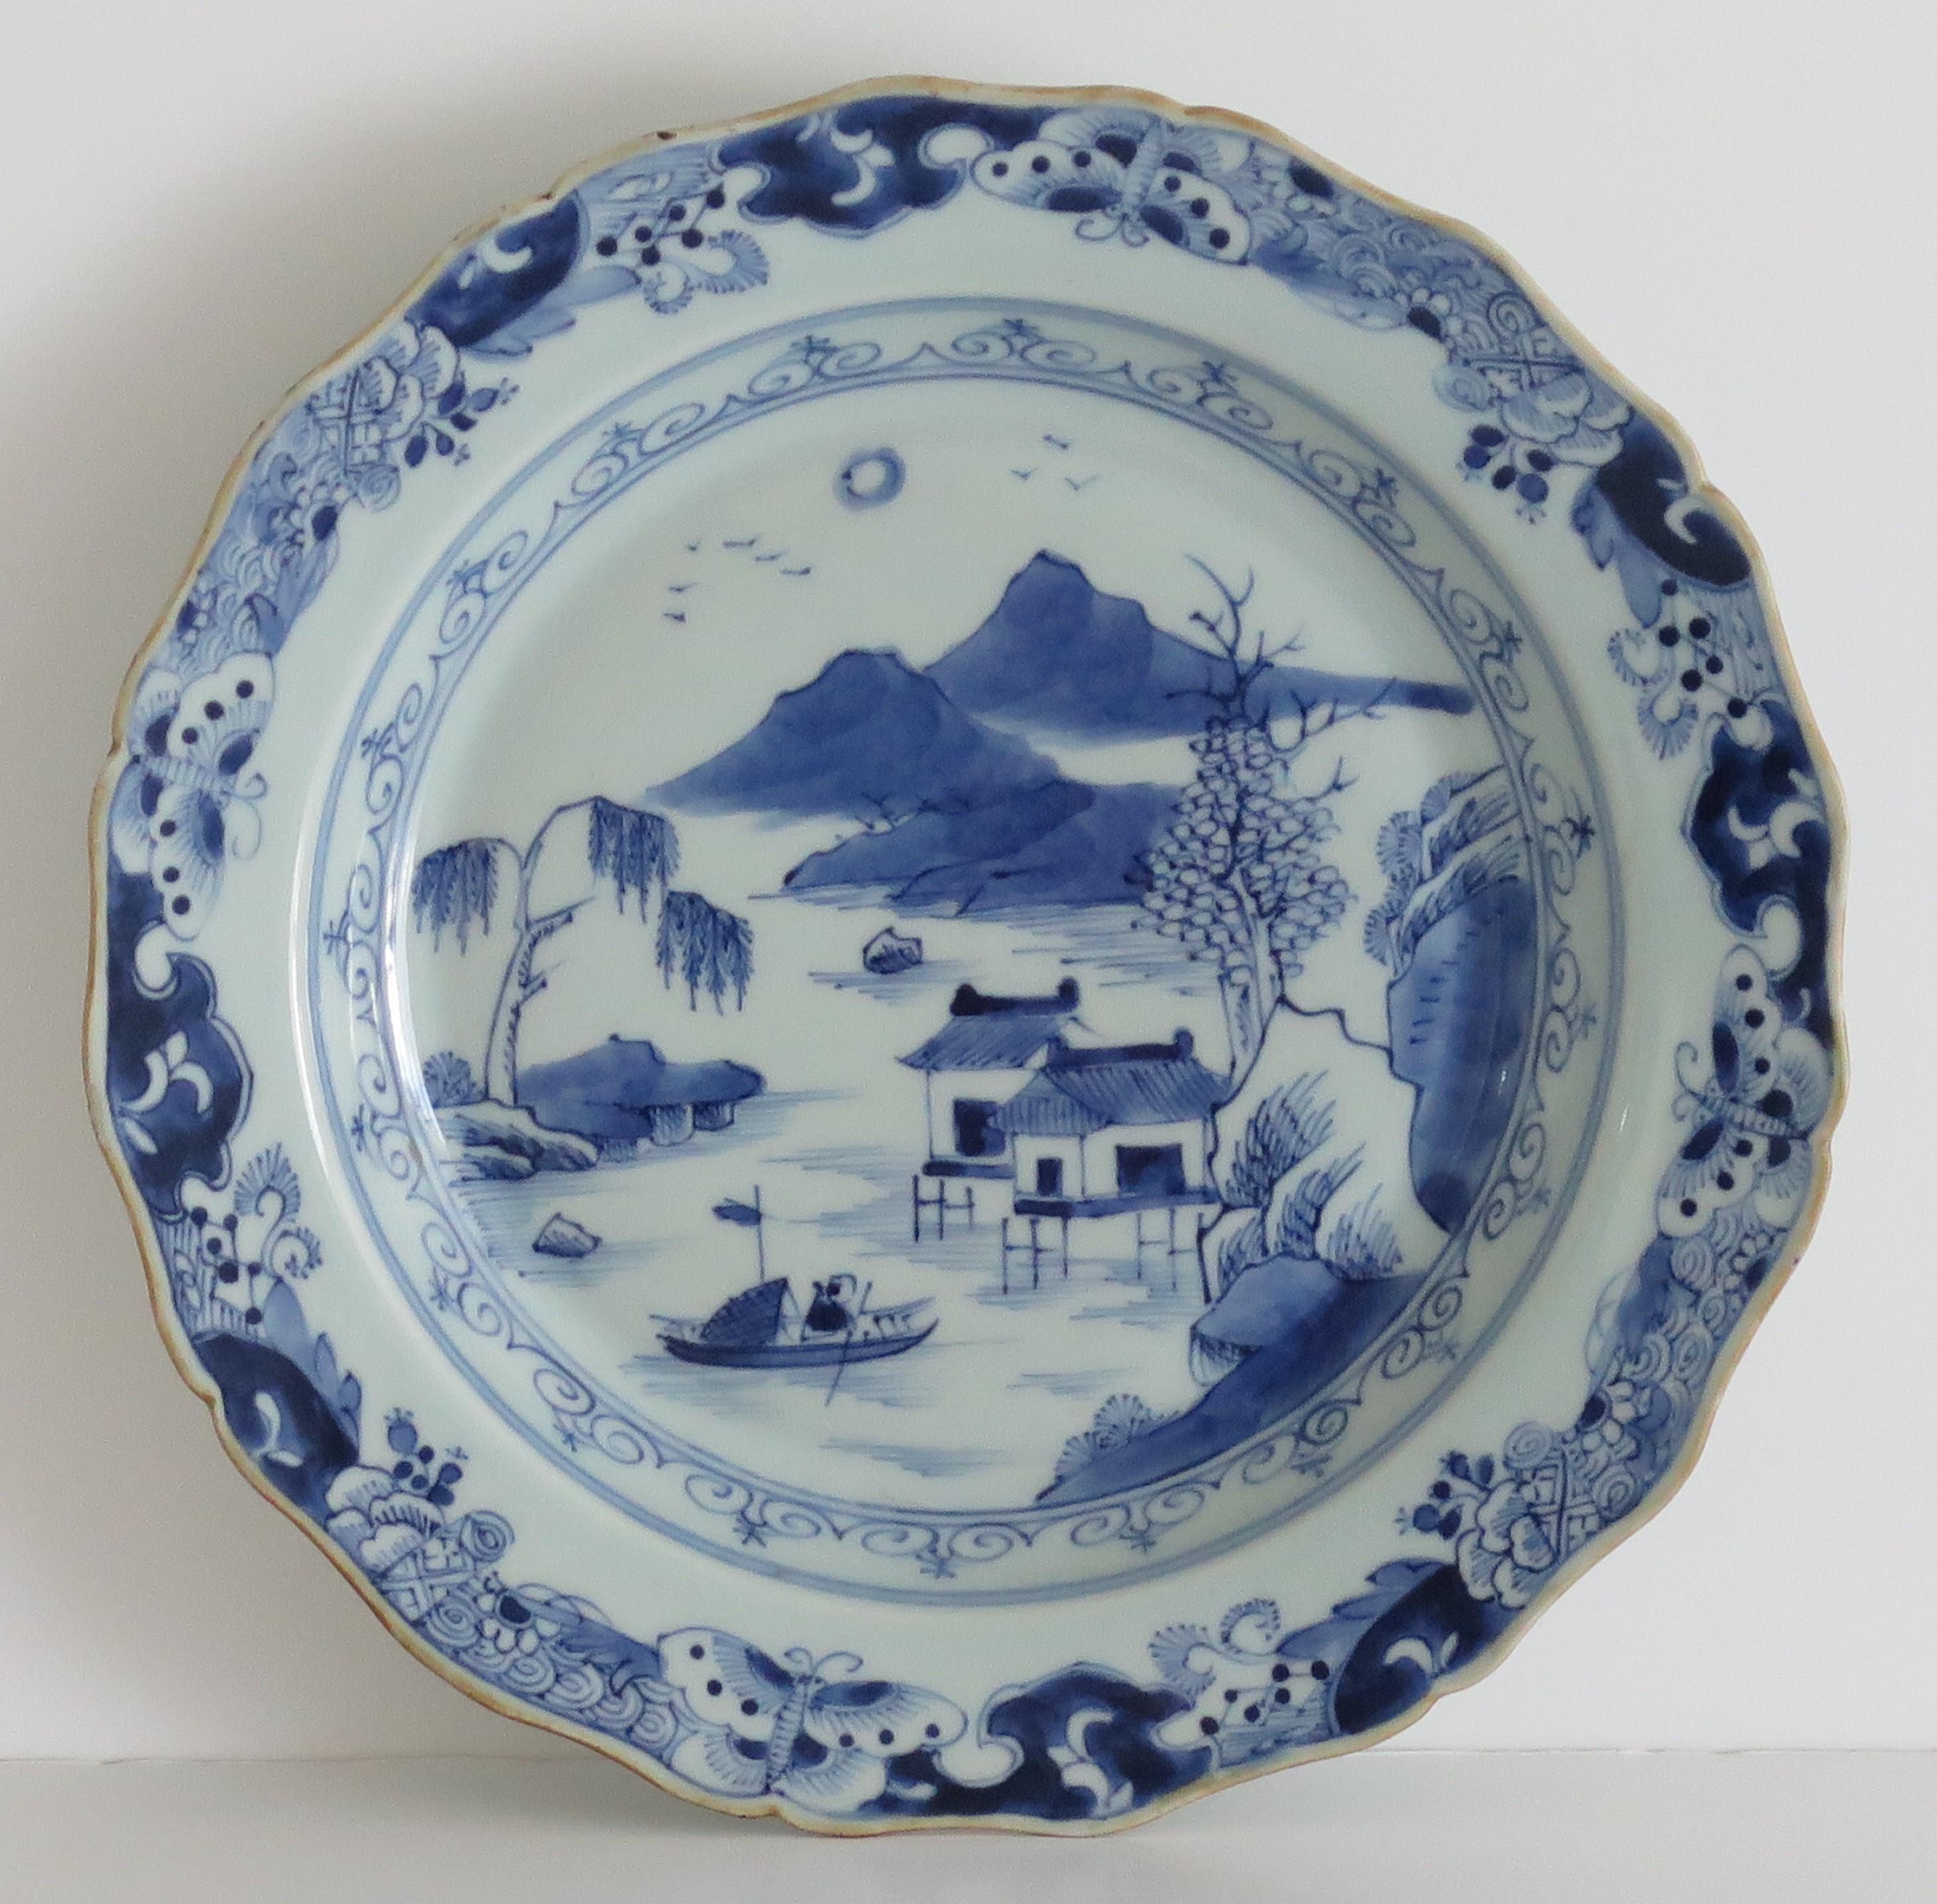 This is a very good Chinese porcelain plate, all hand painted in a Blue and white pattern, made for the export (Canton) market, during the second half of the 18th century.

The plate is circular and well potted with a nice scalloped edge and